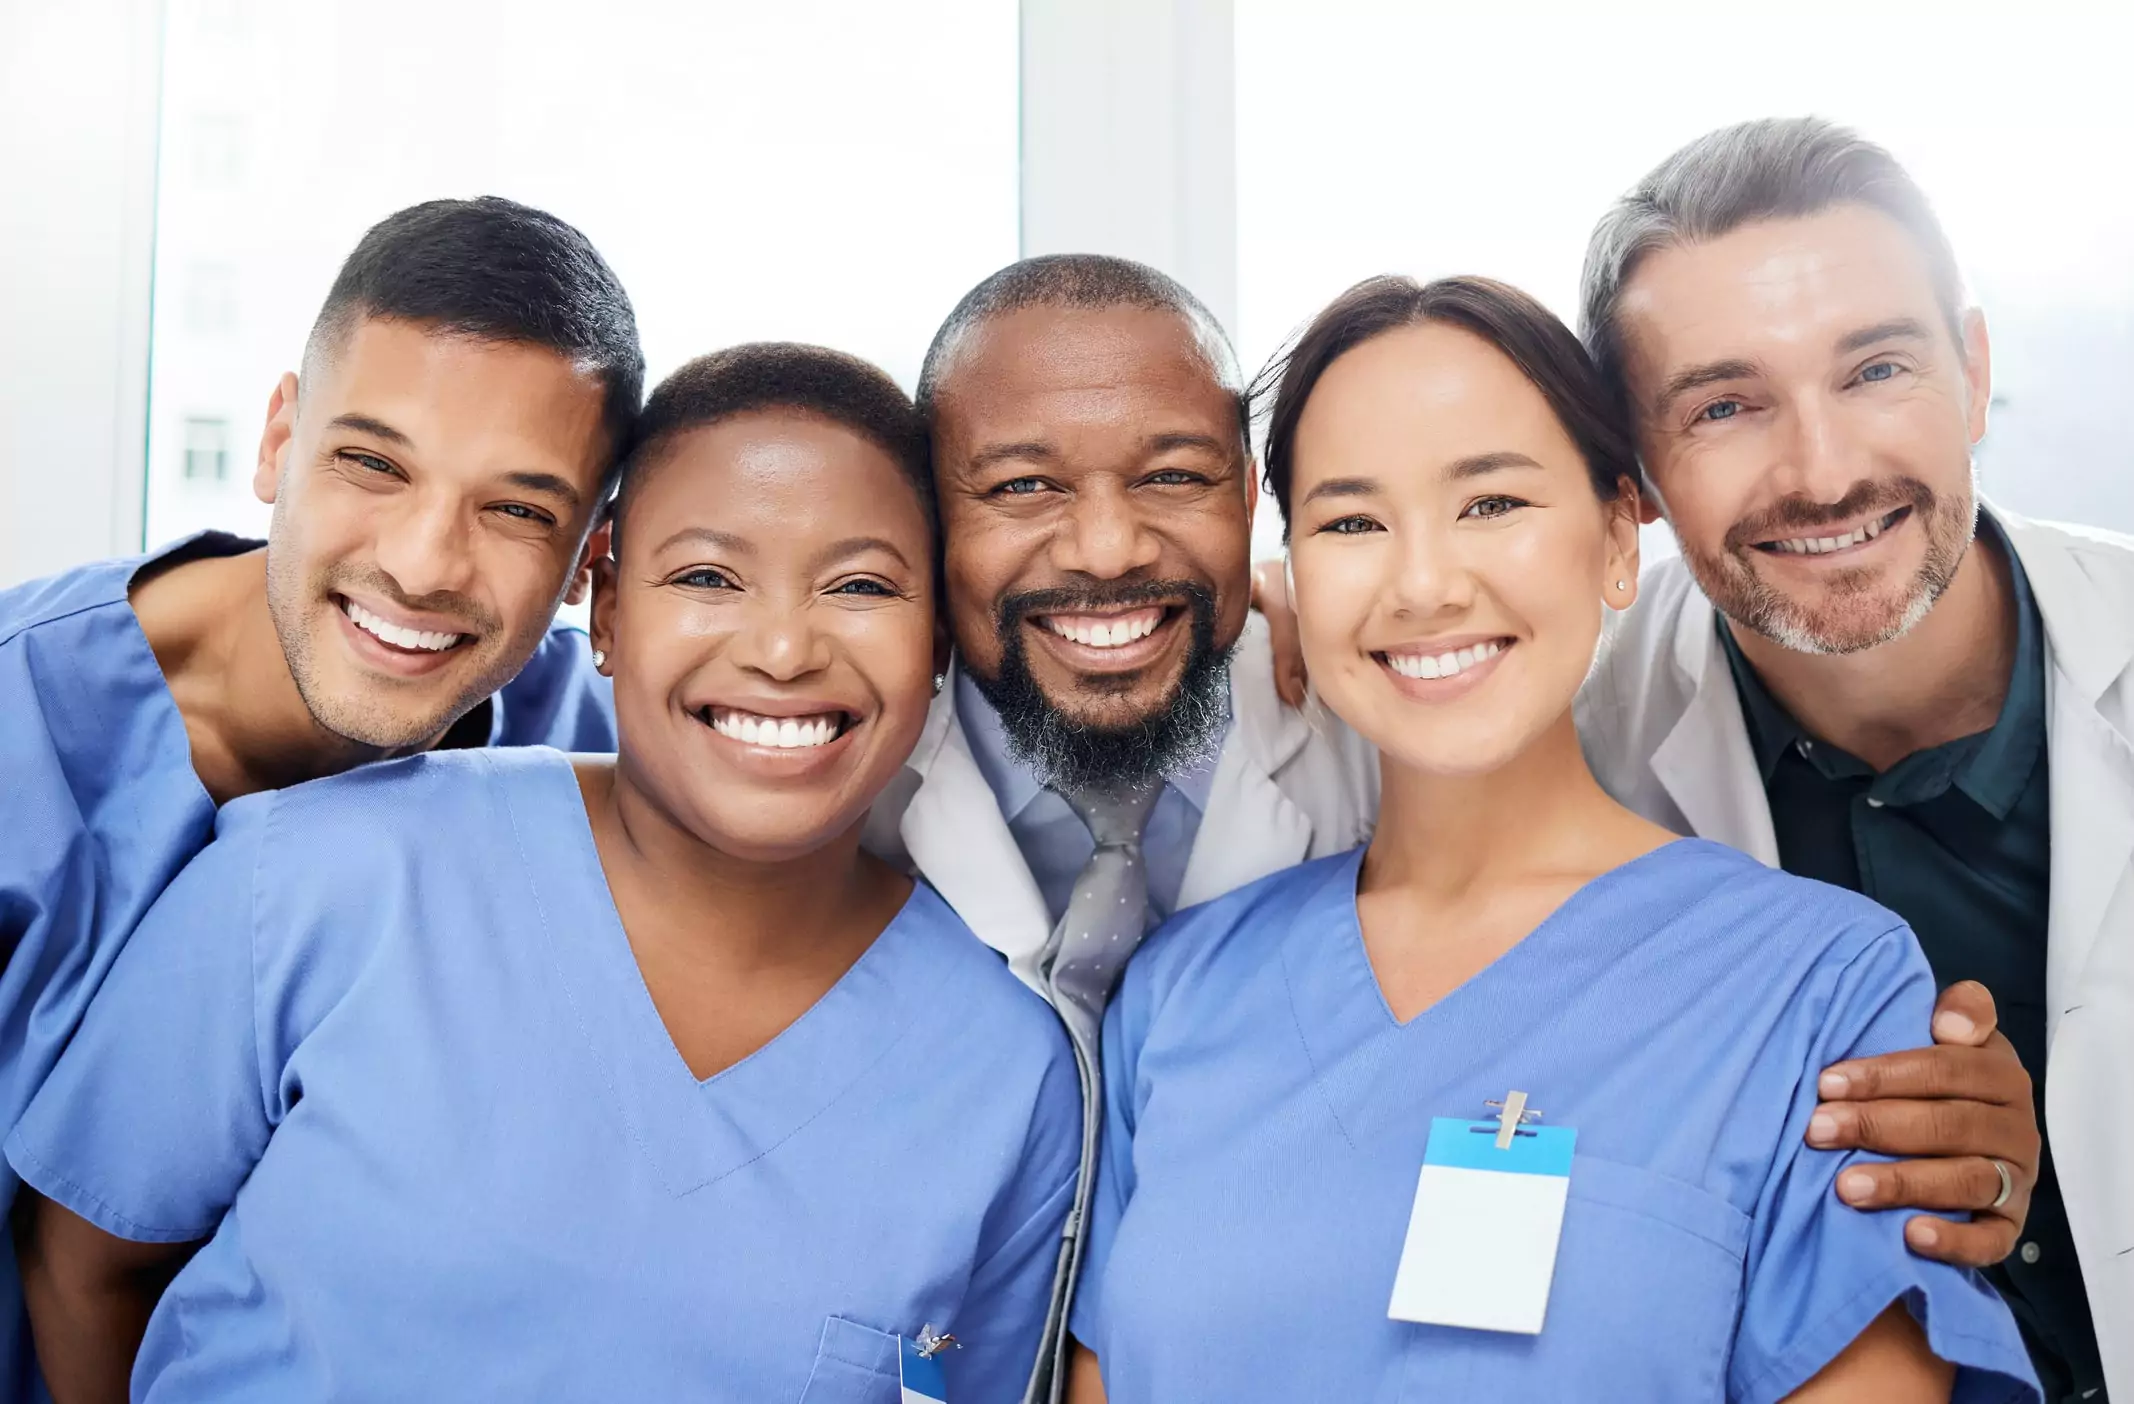 Extended Roles in the Health Care Sector Generate Satisfaction